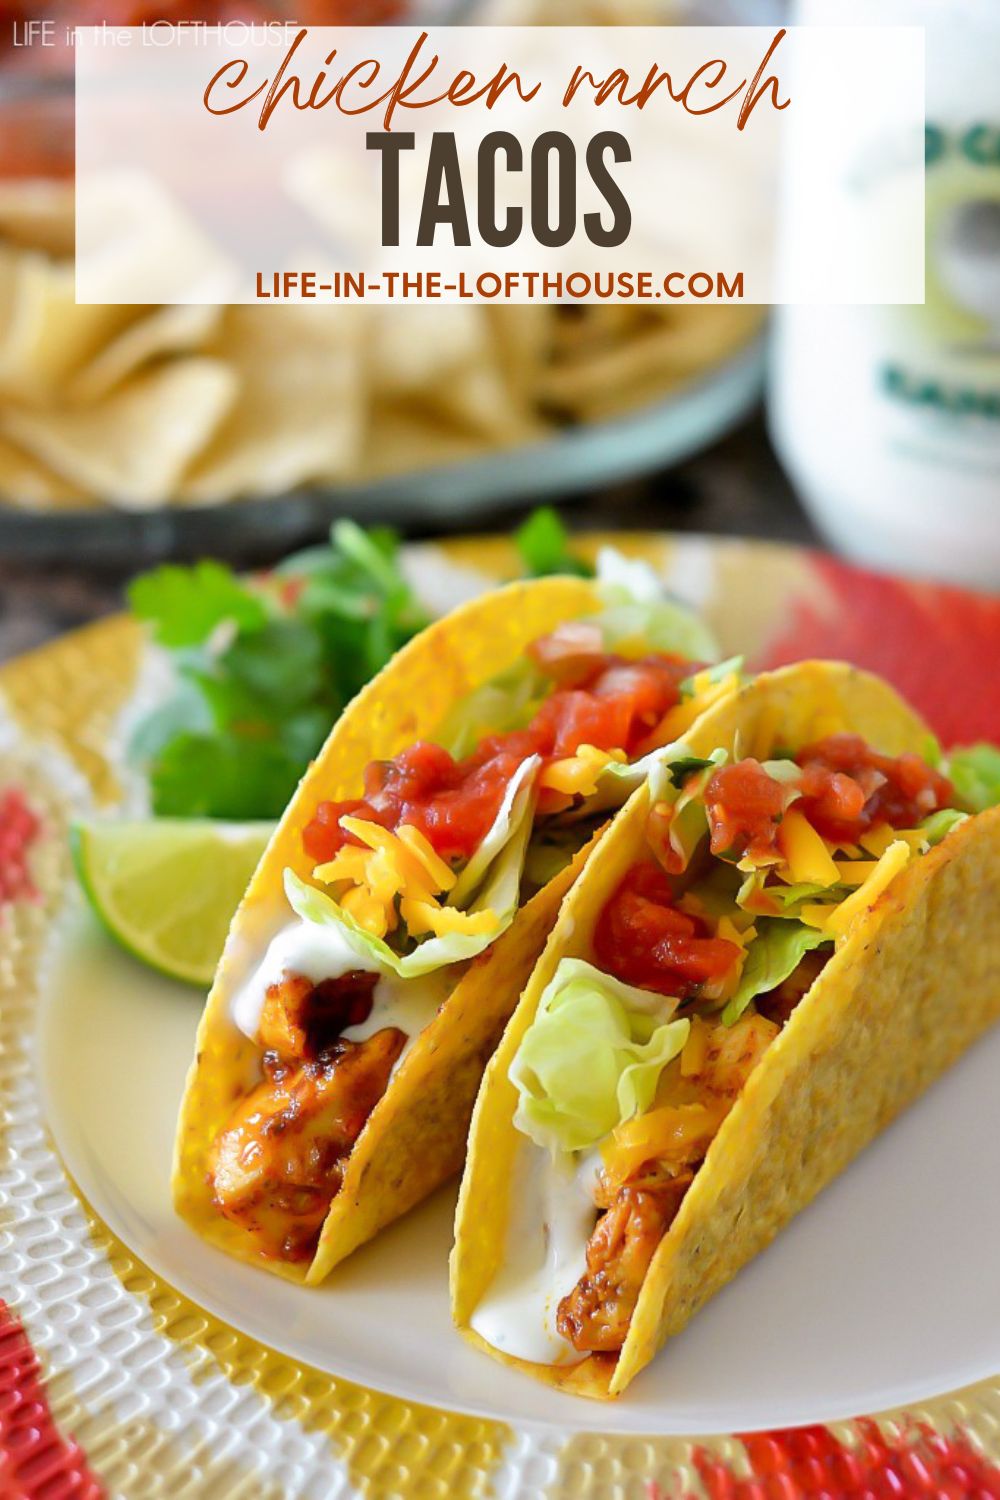 Chicken Ranch Tacos are filled with flavorful chicken, ranch dressing and all your favorite taco toppings inside crispy taco shells. Life-in-the-Lofthouse.com